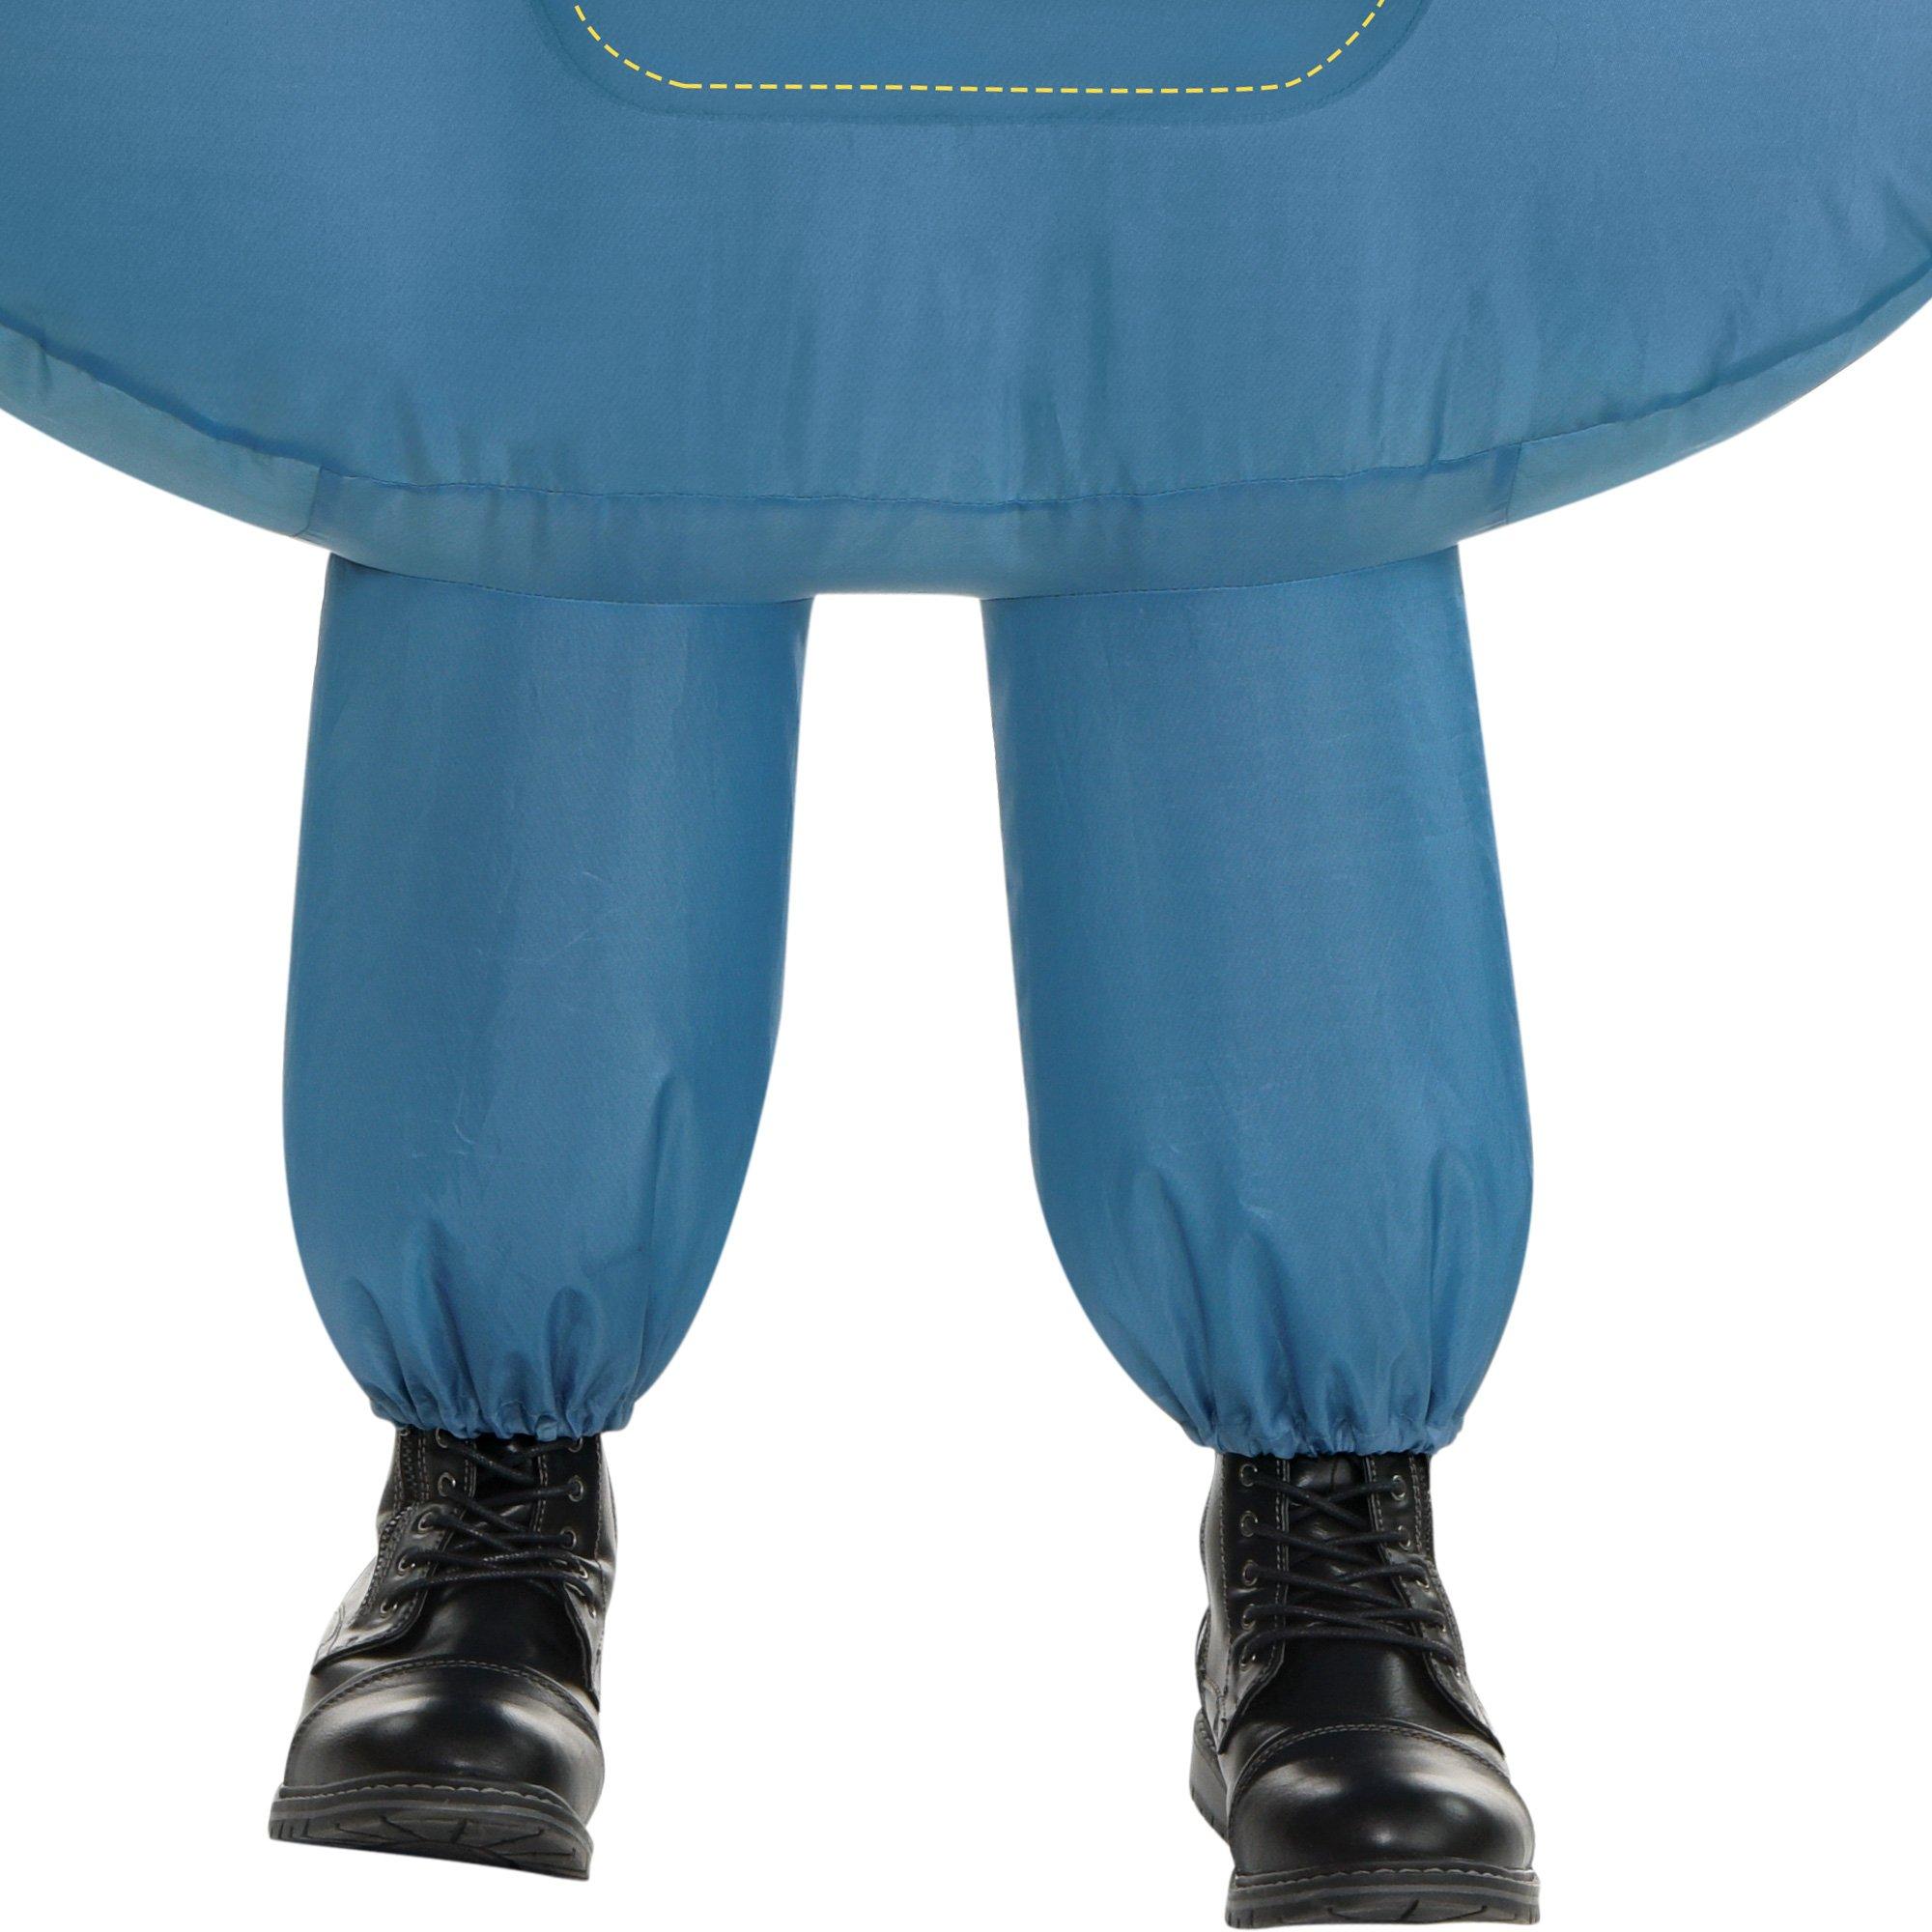 Otto Minion Inflatable Costume for Kids - The Rise of Gru